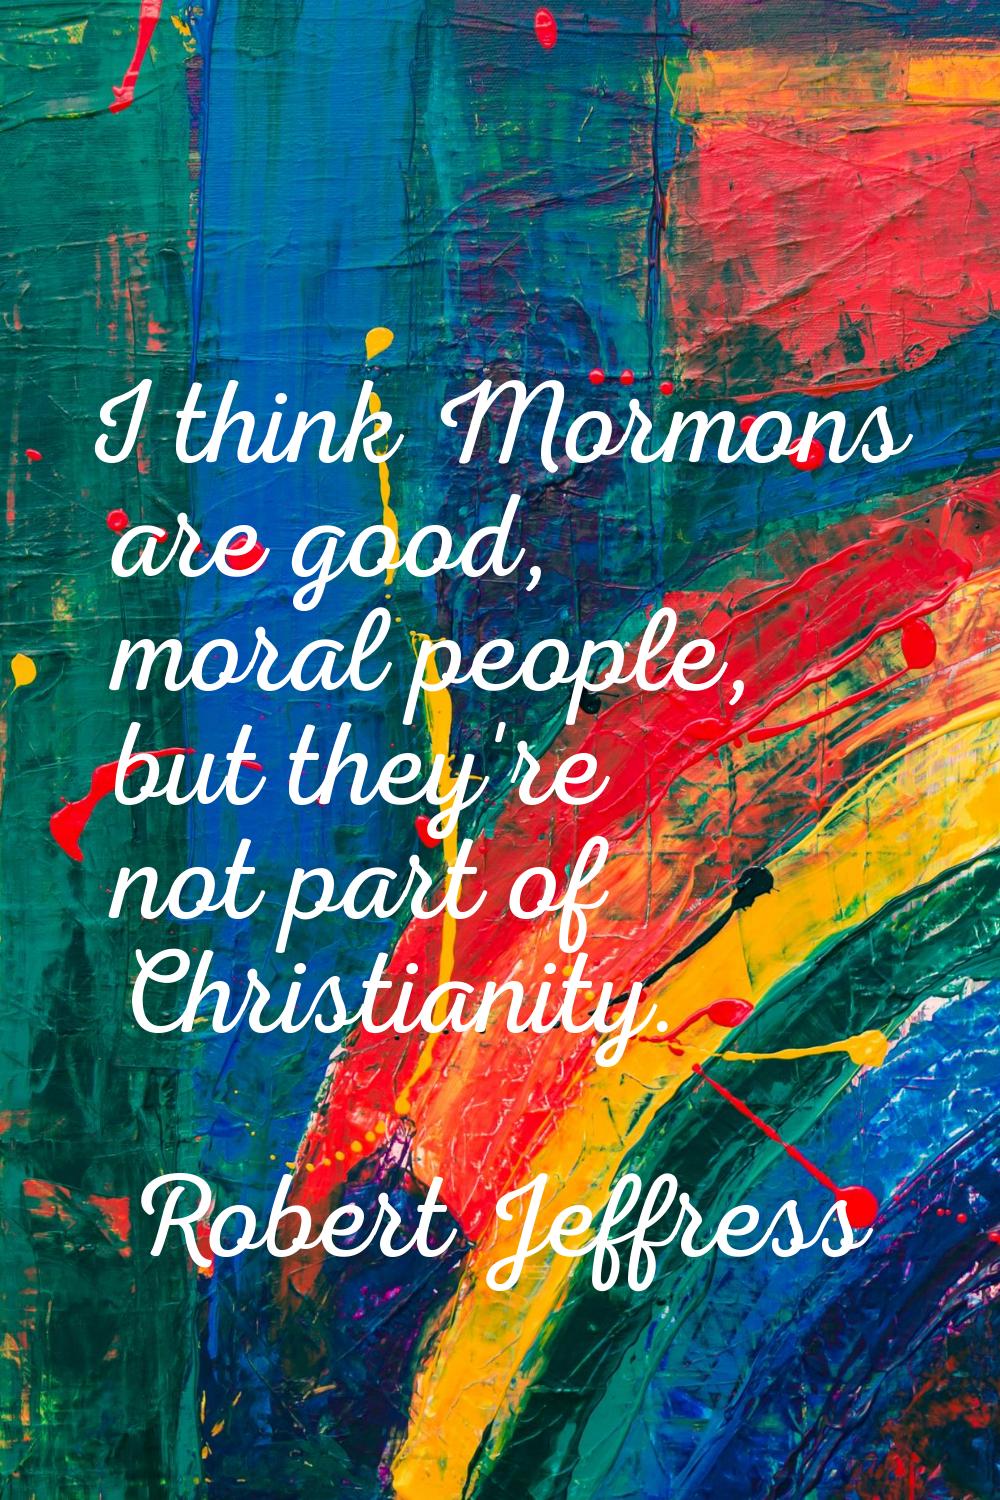 I think Mormons are good, moral people, but they're not part of Christianity.